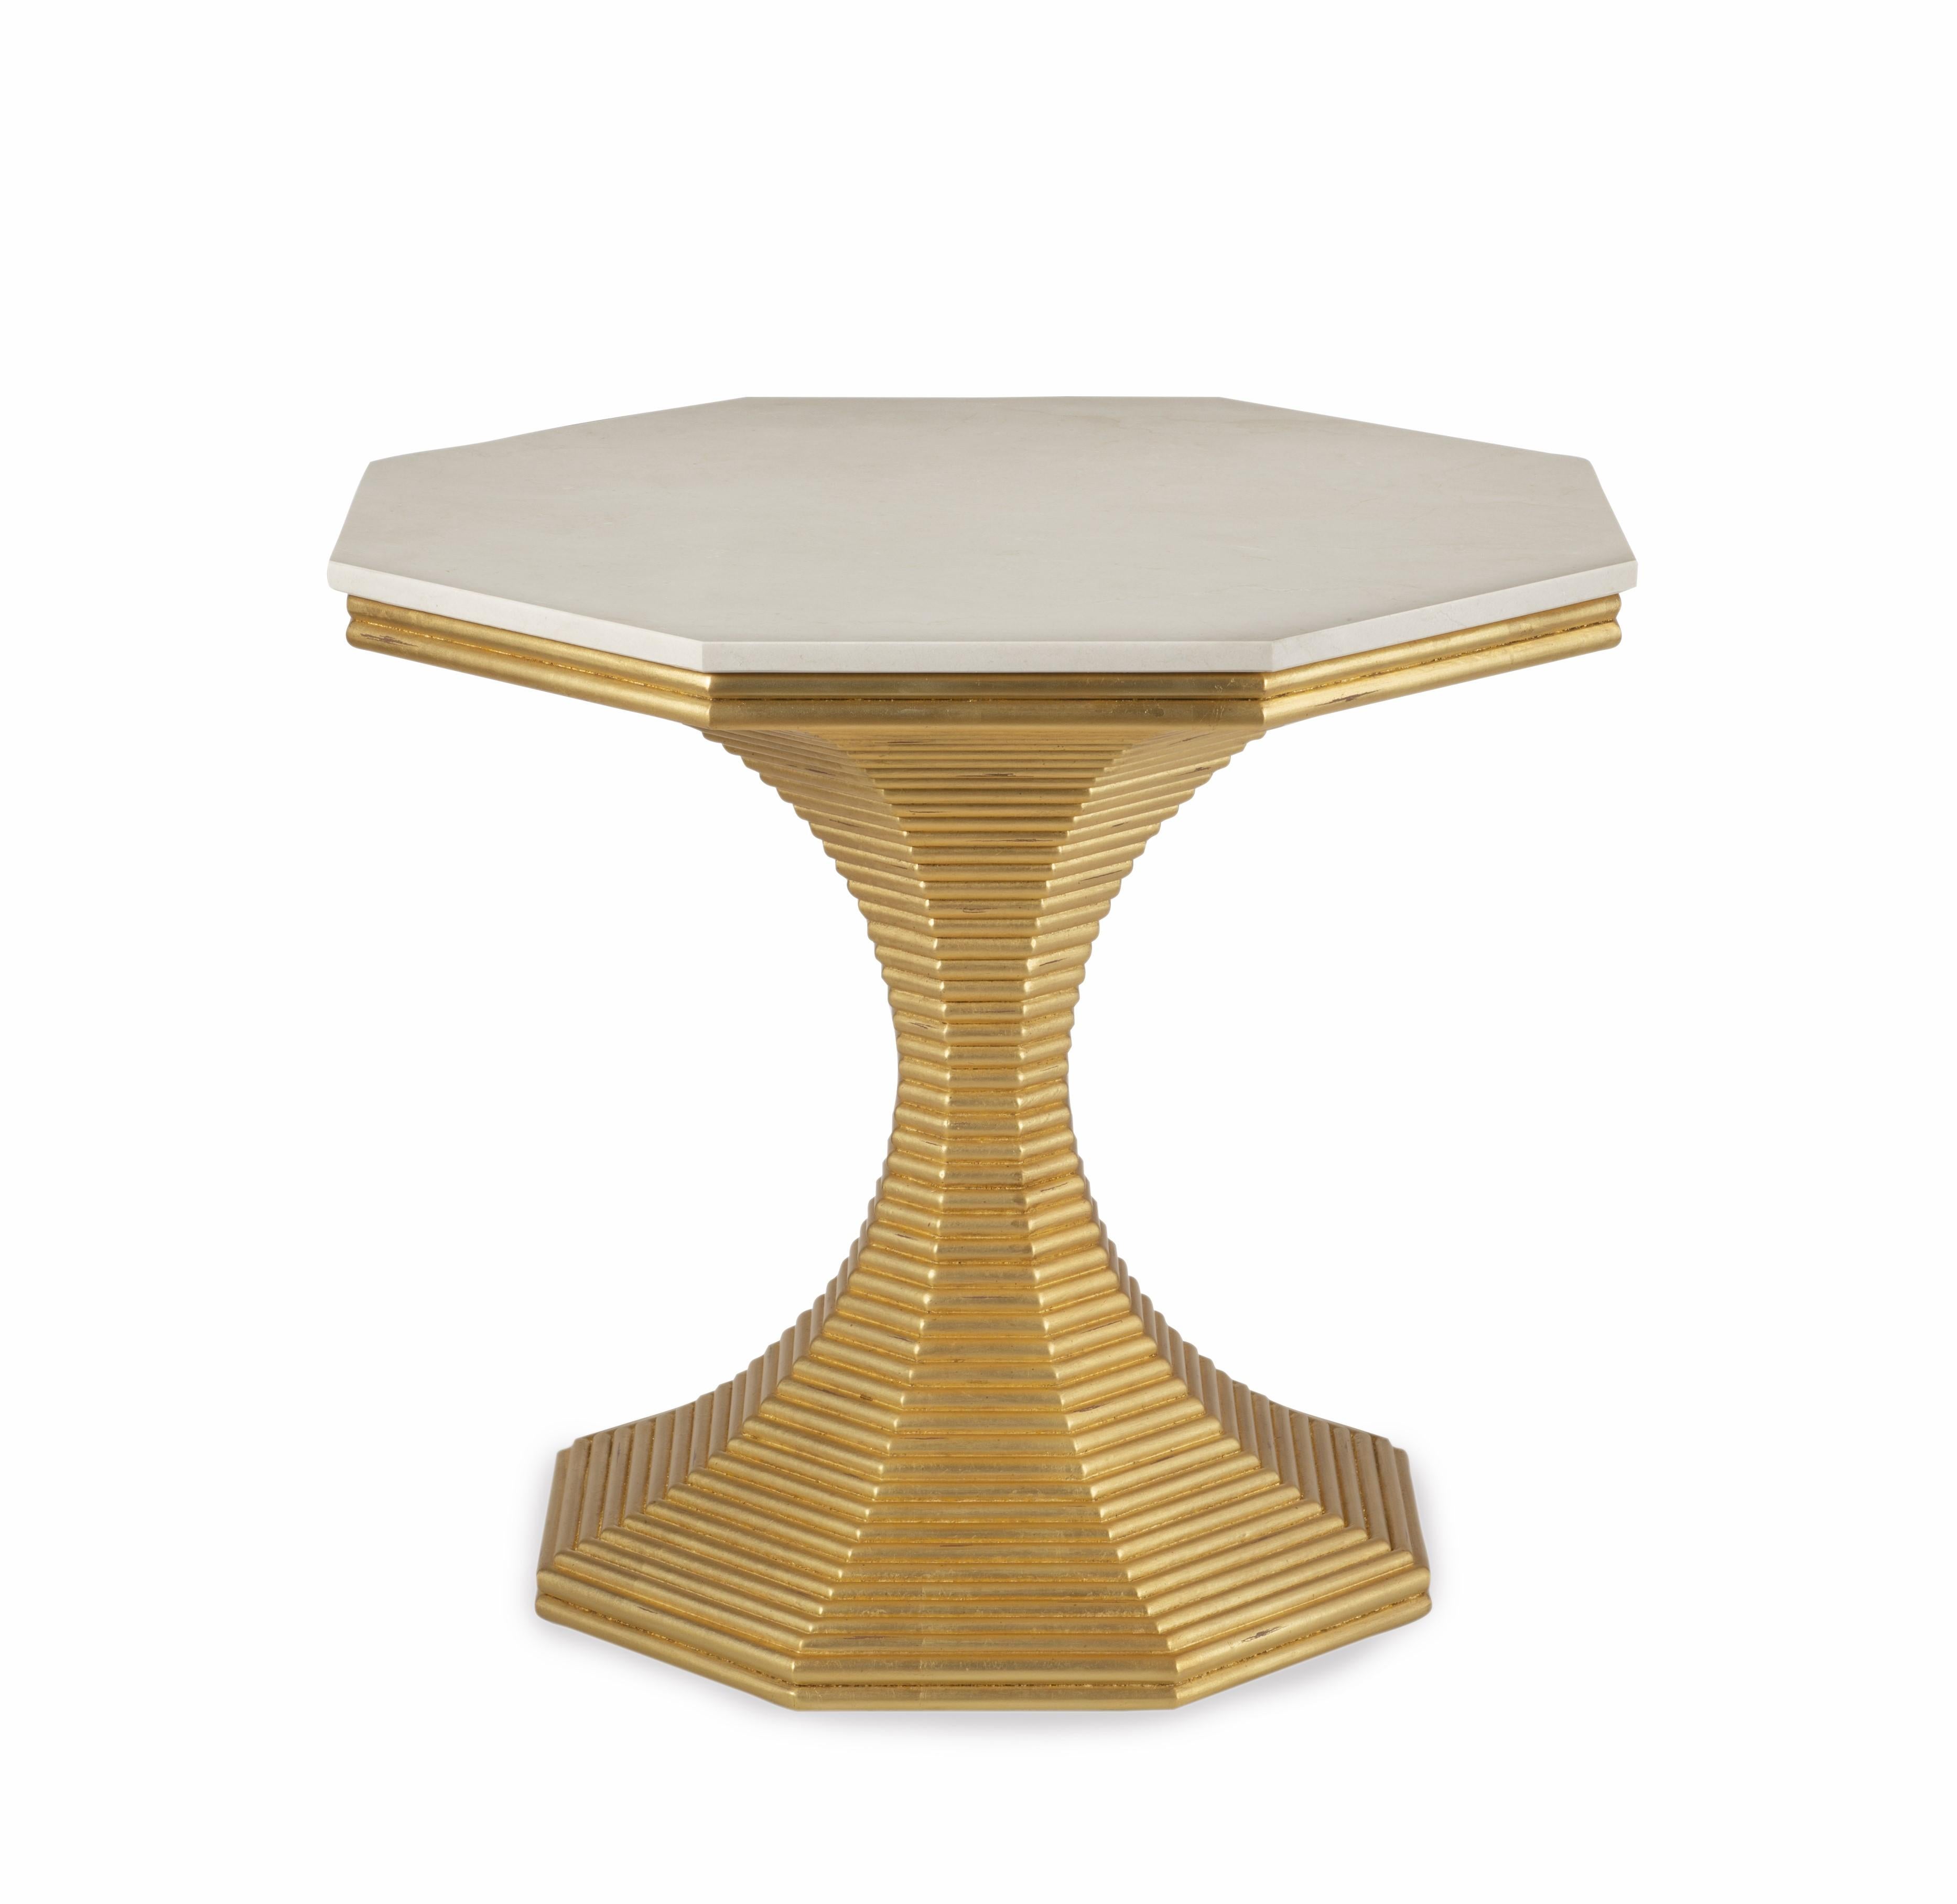 The Hourglass Table’s stone top is crafted of Crema Marfil marble, a material with unique and handsome variations. It is well-regarded for its beautiful cream color with light brown undertones as well as for its delicate veining and unique